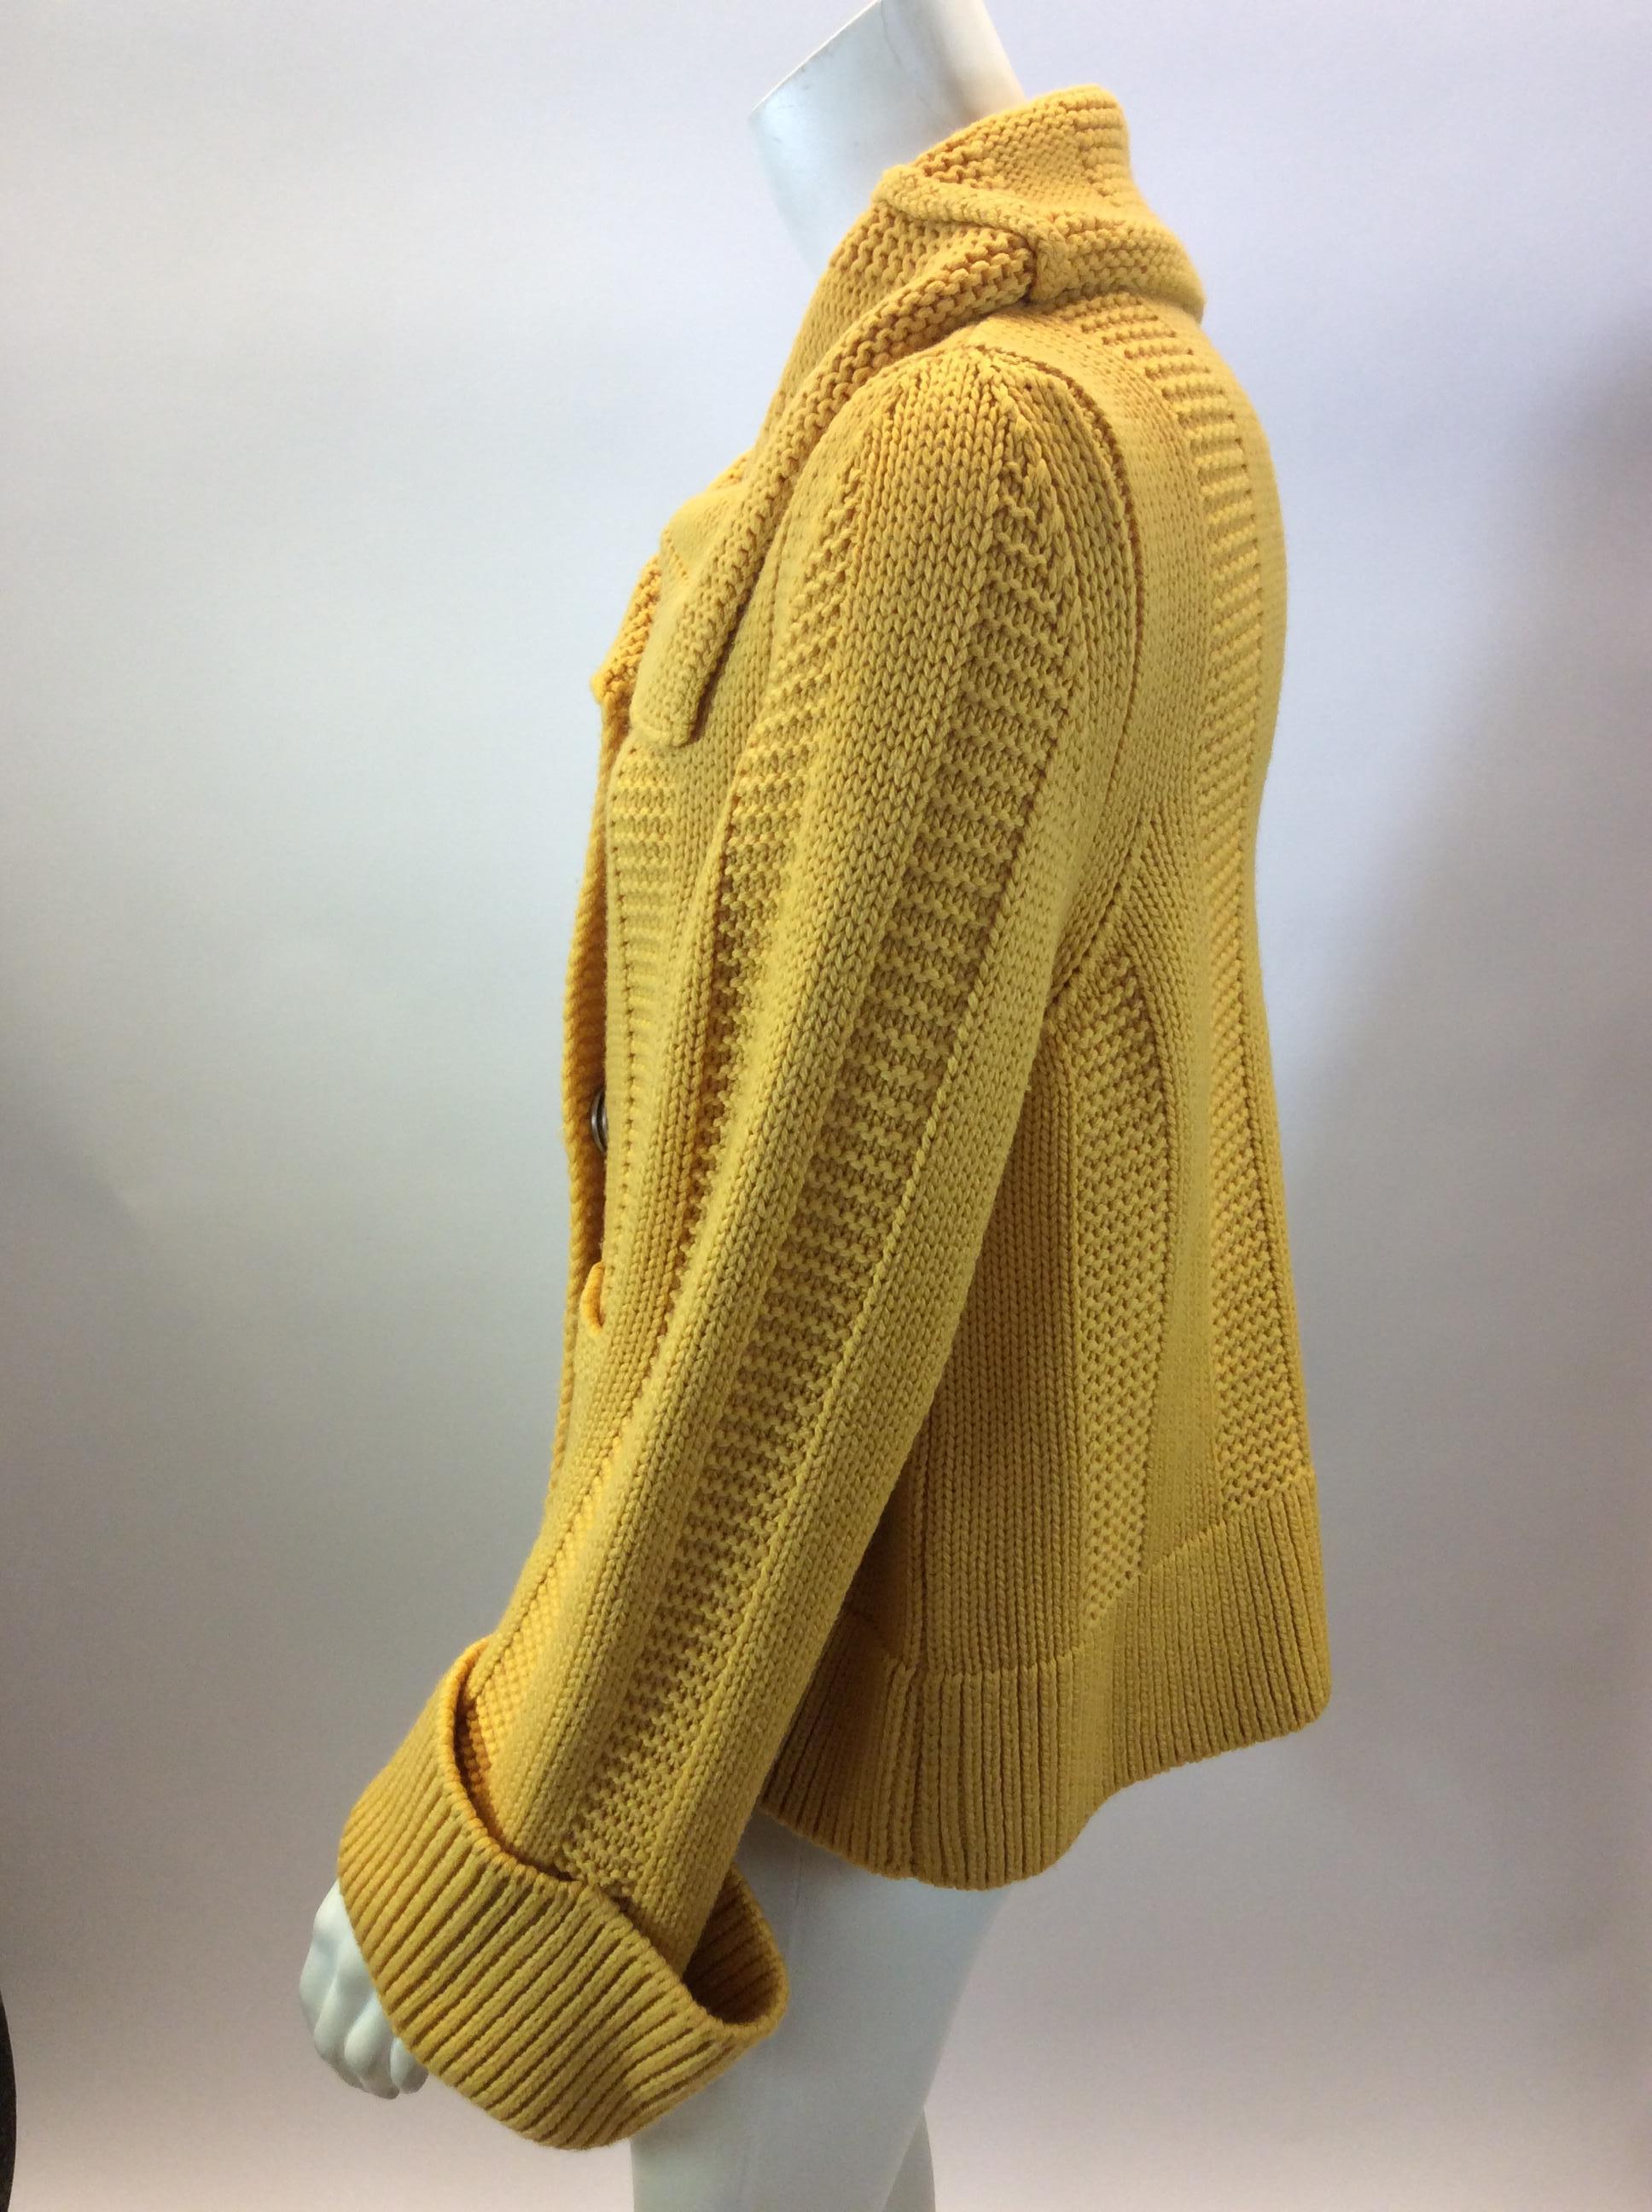 Piazza Sempione Marigold Wool Sweater
$199
Made in Italy
100% Wool
Size 46
Length 21.5